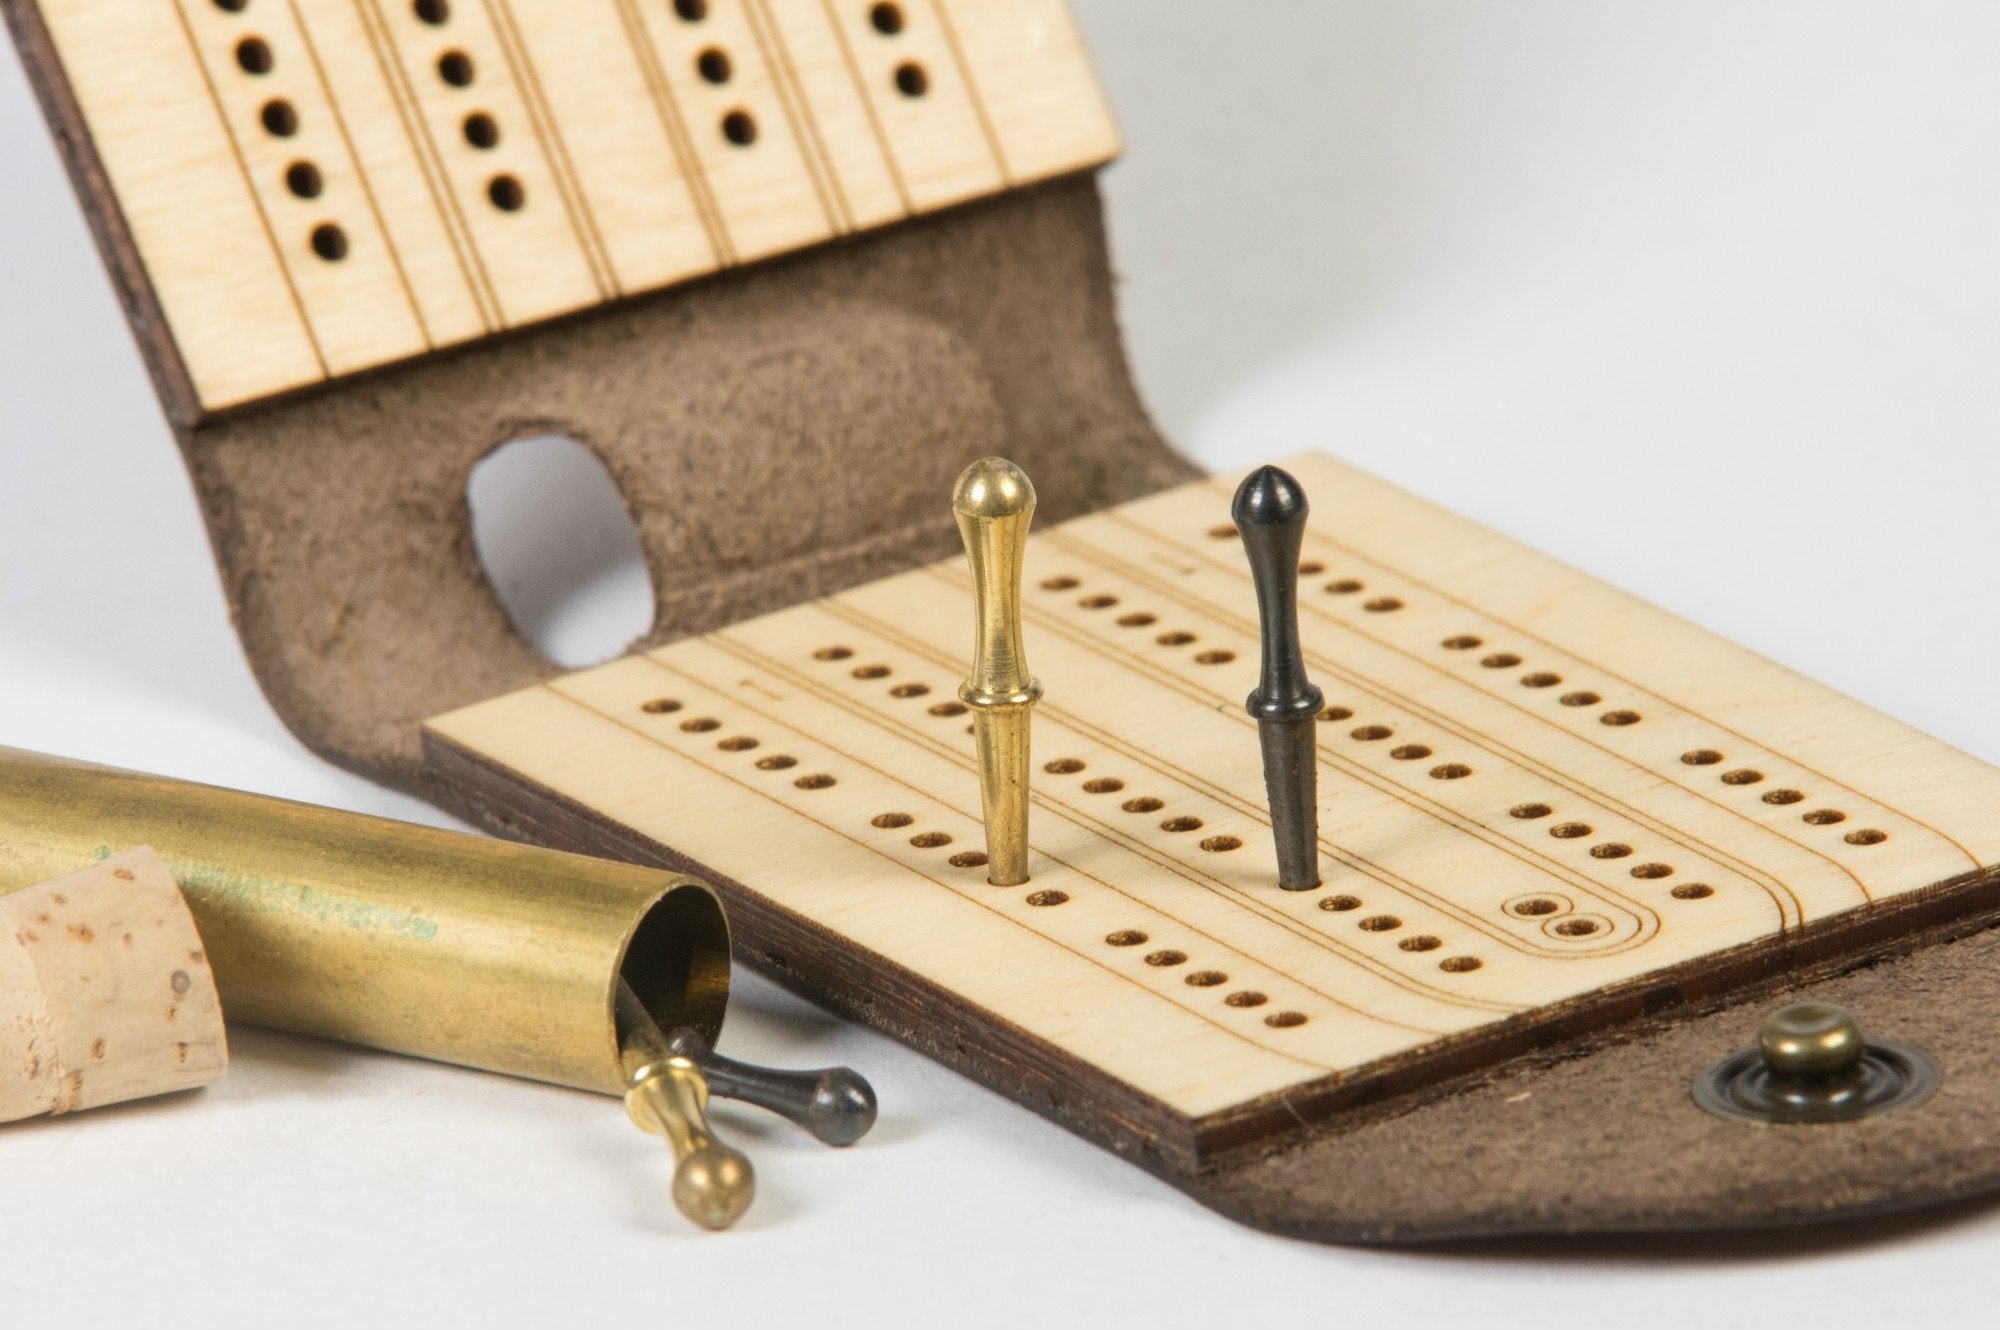 Metal Fabrication 101: How Our Cribbage Pegs Are Made